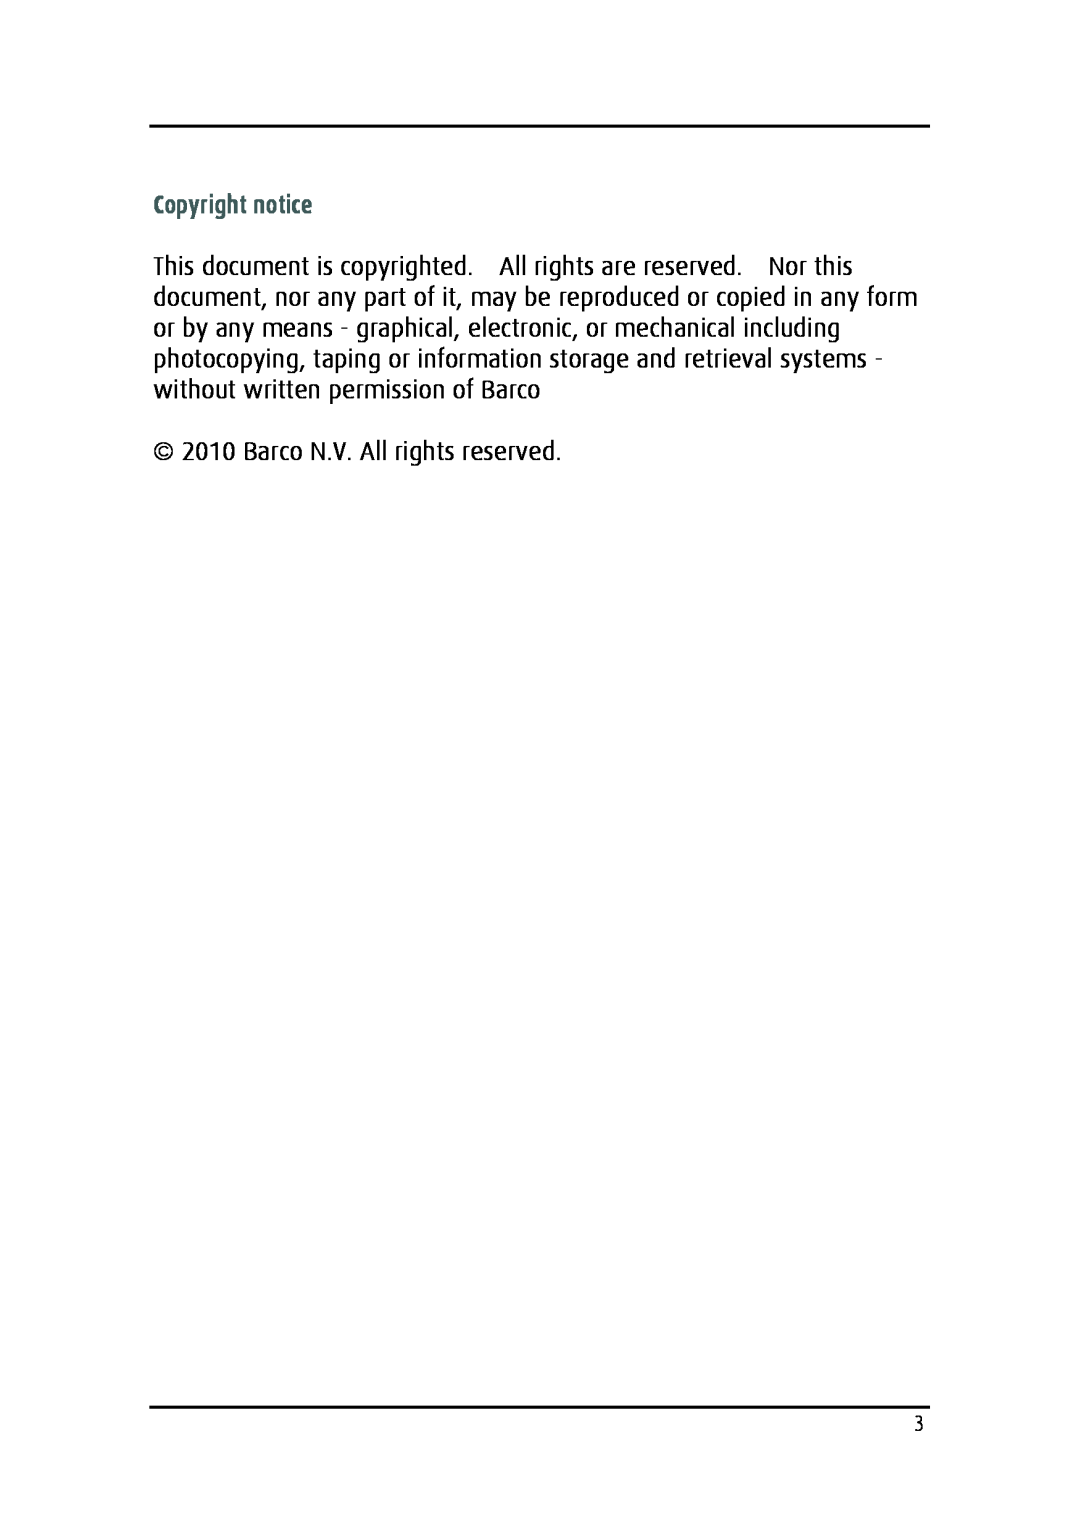 Barco MDRC-2124 user manual Copyright notice, Barco N.V. All rights reserved 